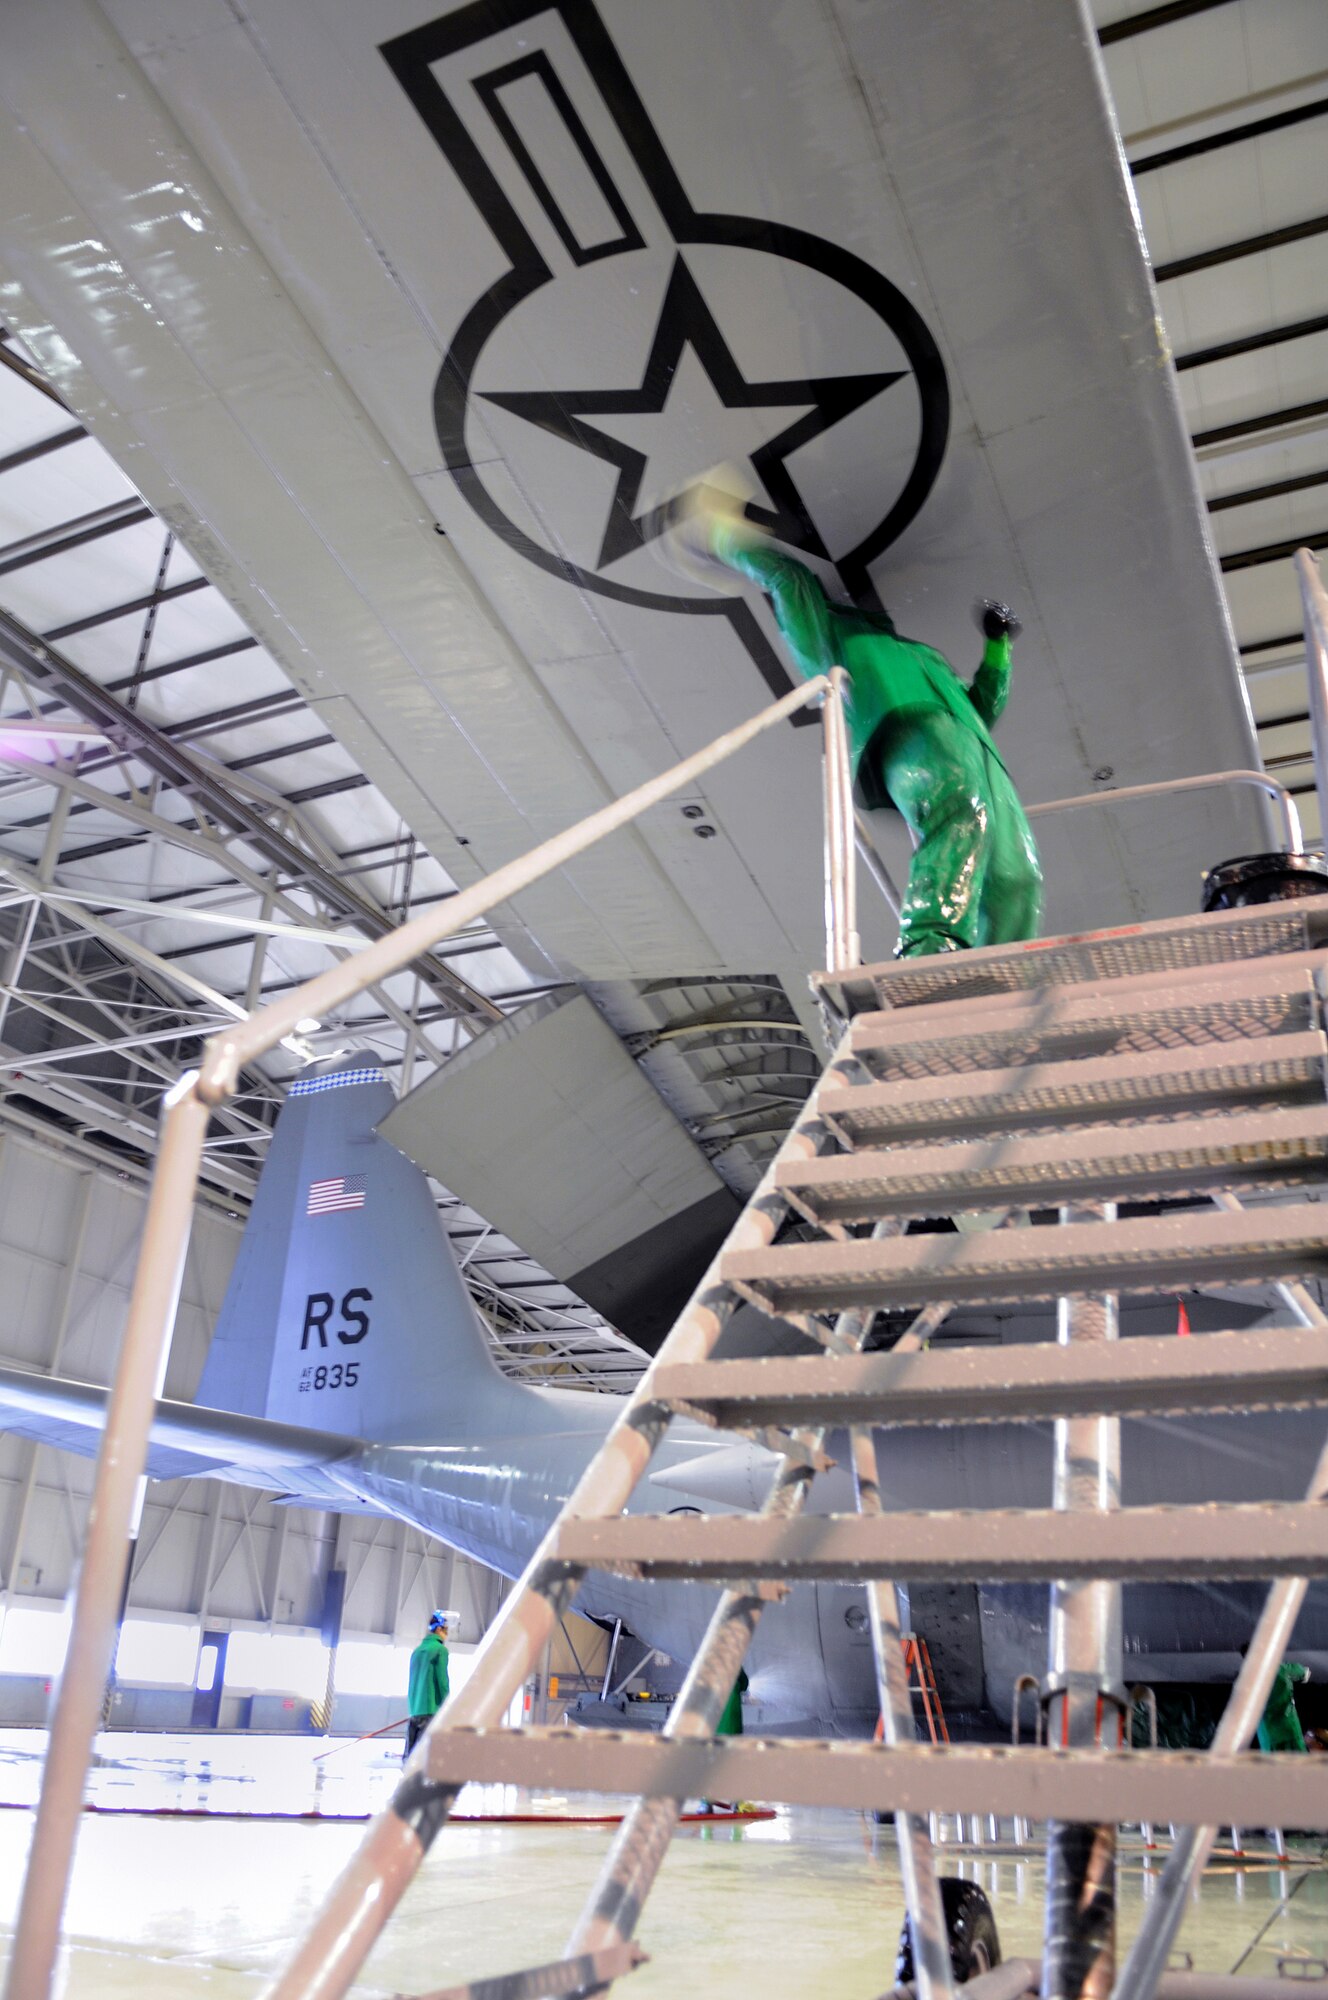 Staff Sgt. Darren Garger, 86th Aircraft Maintenance Squadron crew chief, scrubs a C-130E Hercules in Hanger 1, Ramstein Air Base, Germany, Oct. 28, 2008. The wash crew is made up of a 12-member team from the 86th AMXS who wash aircraft every 90 days to keep them mission ready. (U.S. Air Force photo by Airman Alexandria Mosness)